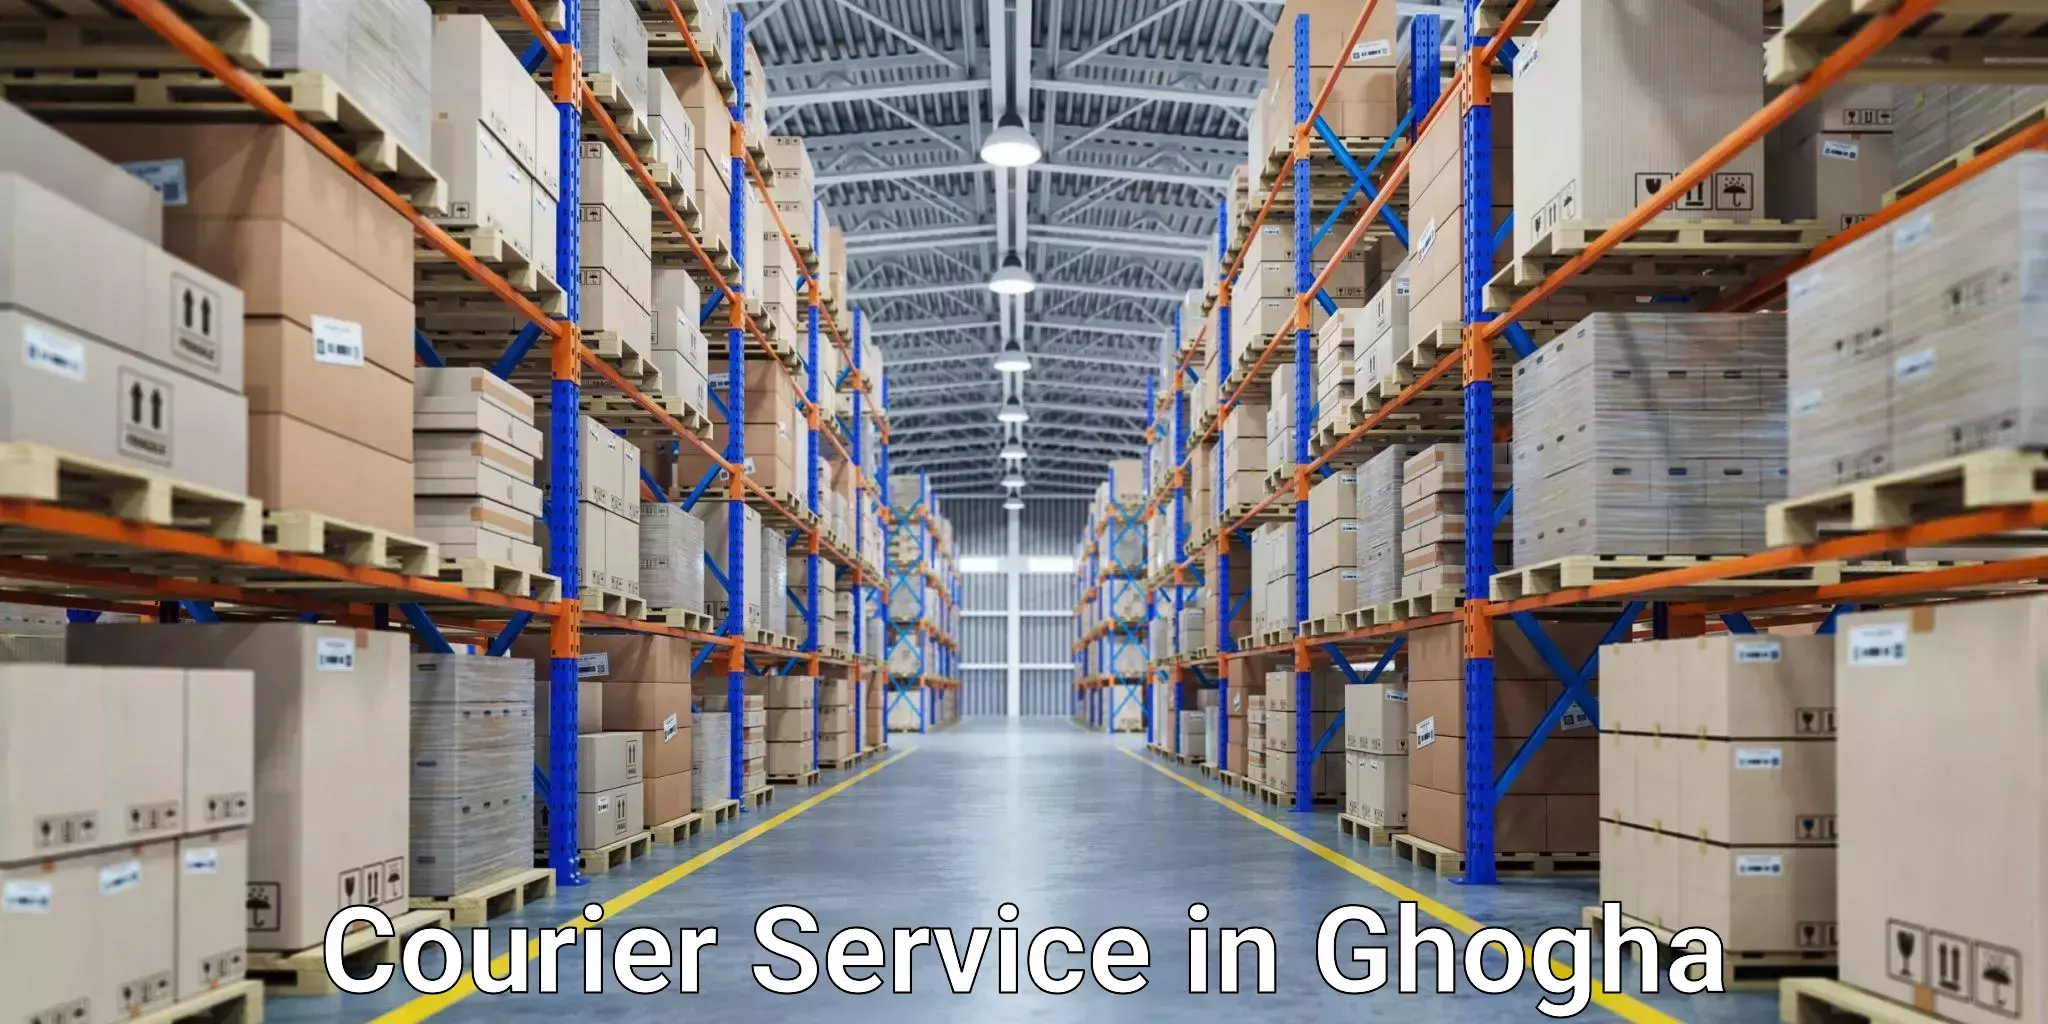 Tailored shipping plans in Ghogha